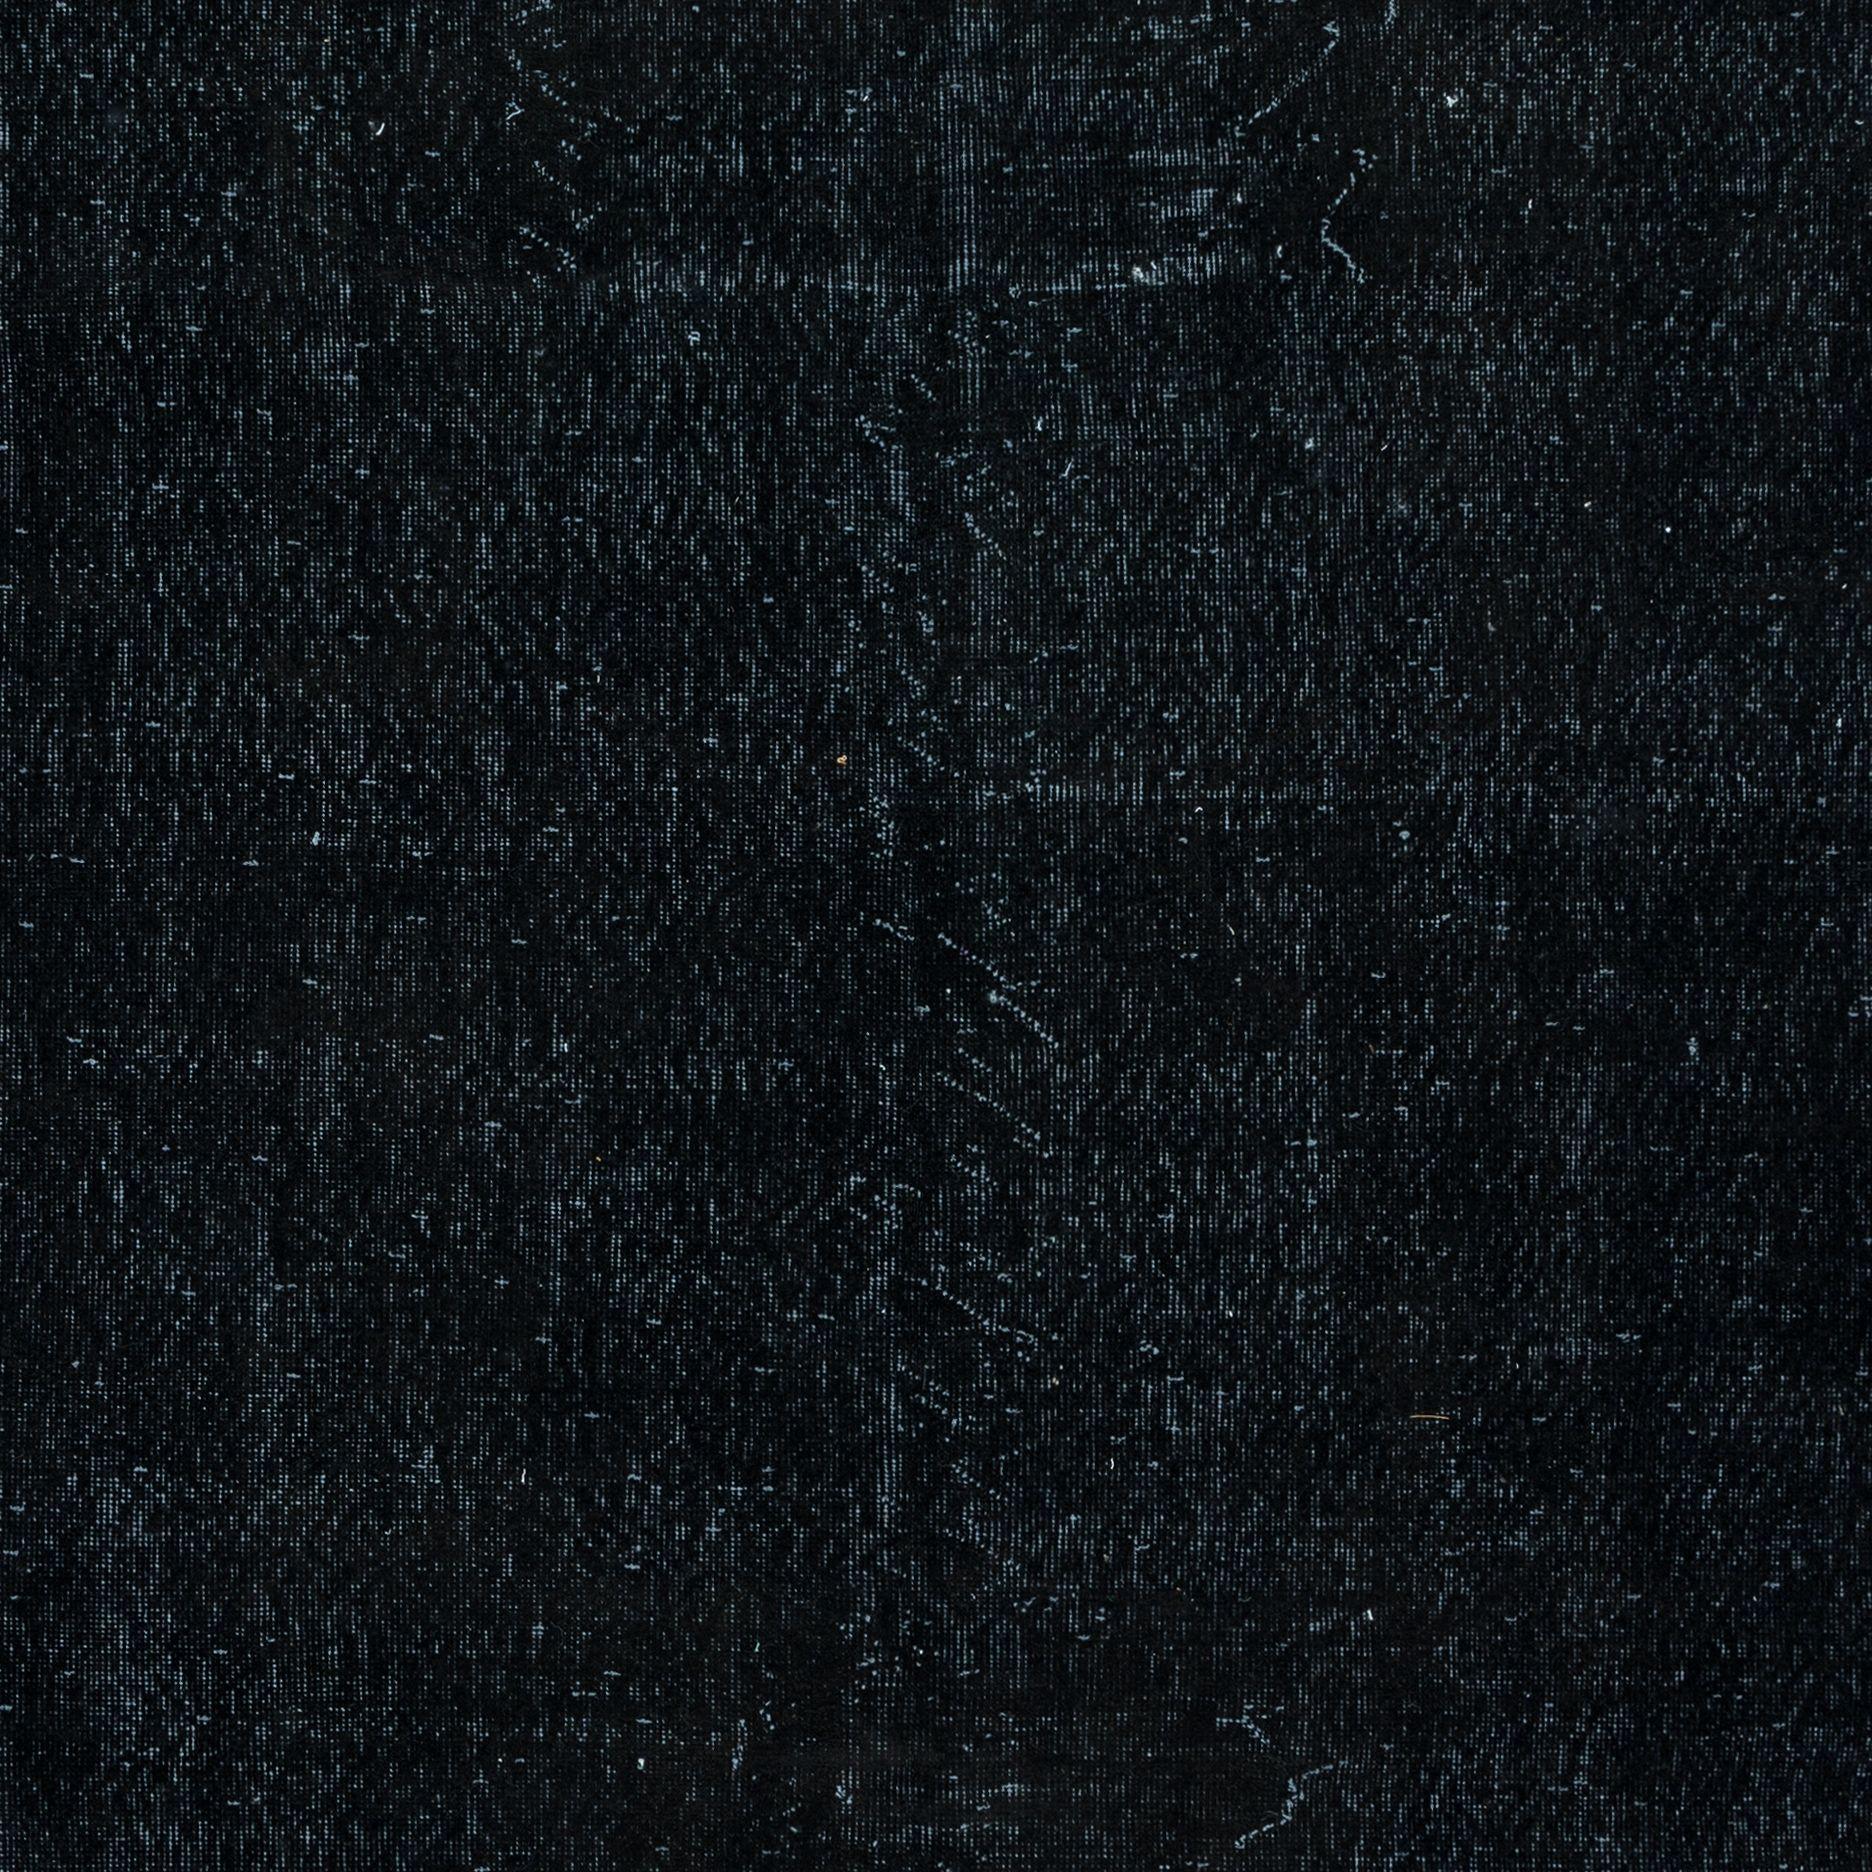 Hand-Woven 5.4x9 Ft Plain Black Area Rug, Handknotted and Handwoven in Turkey For Sale